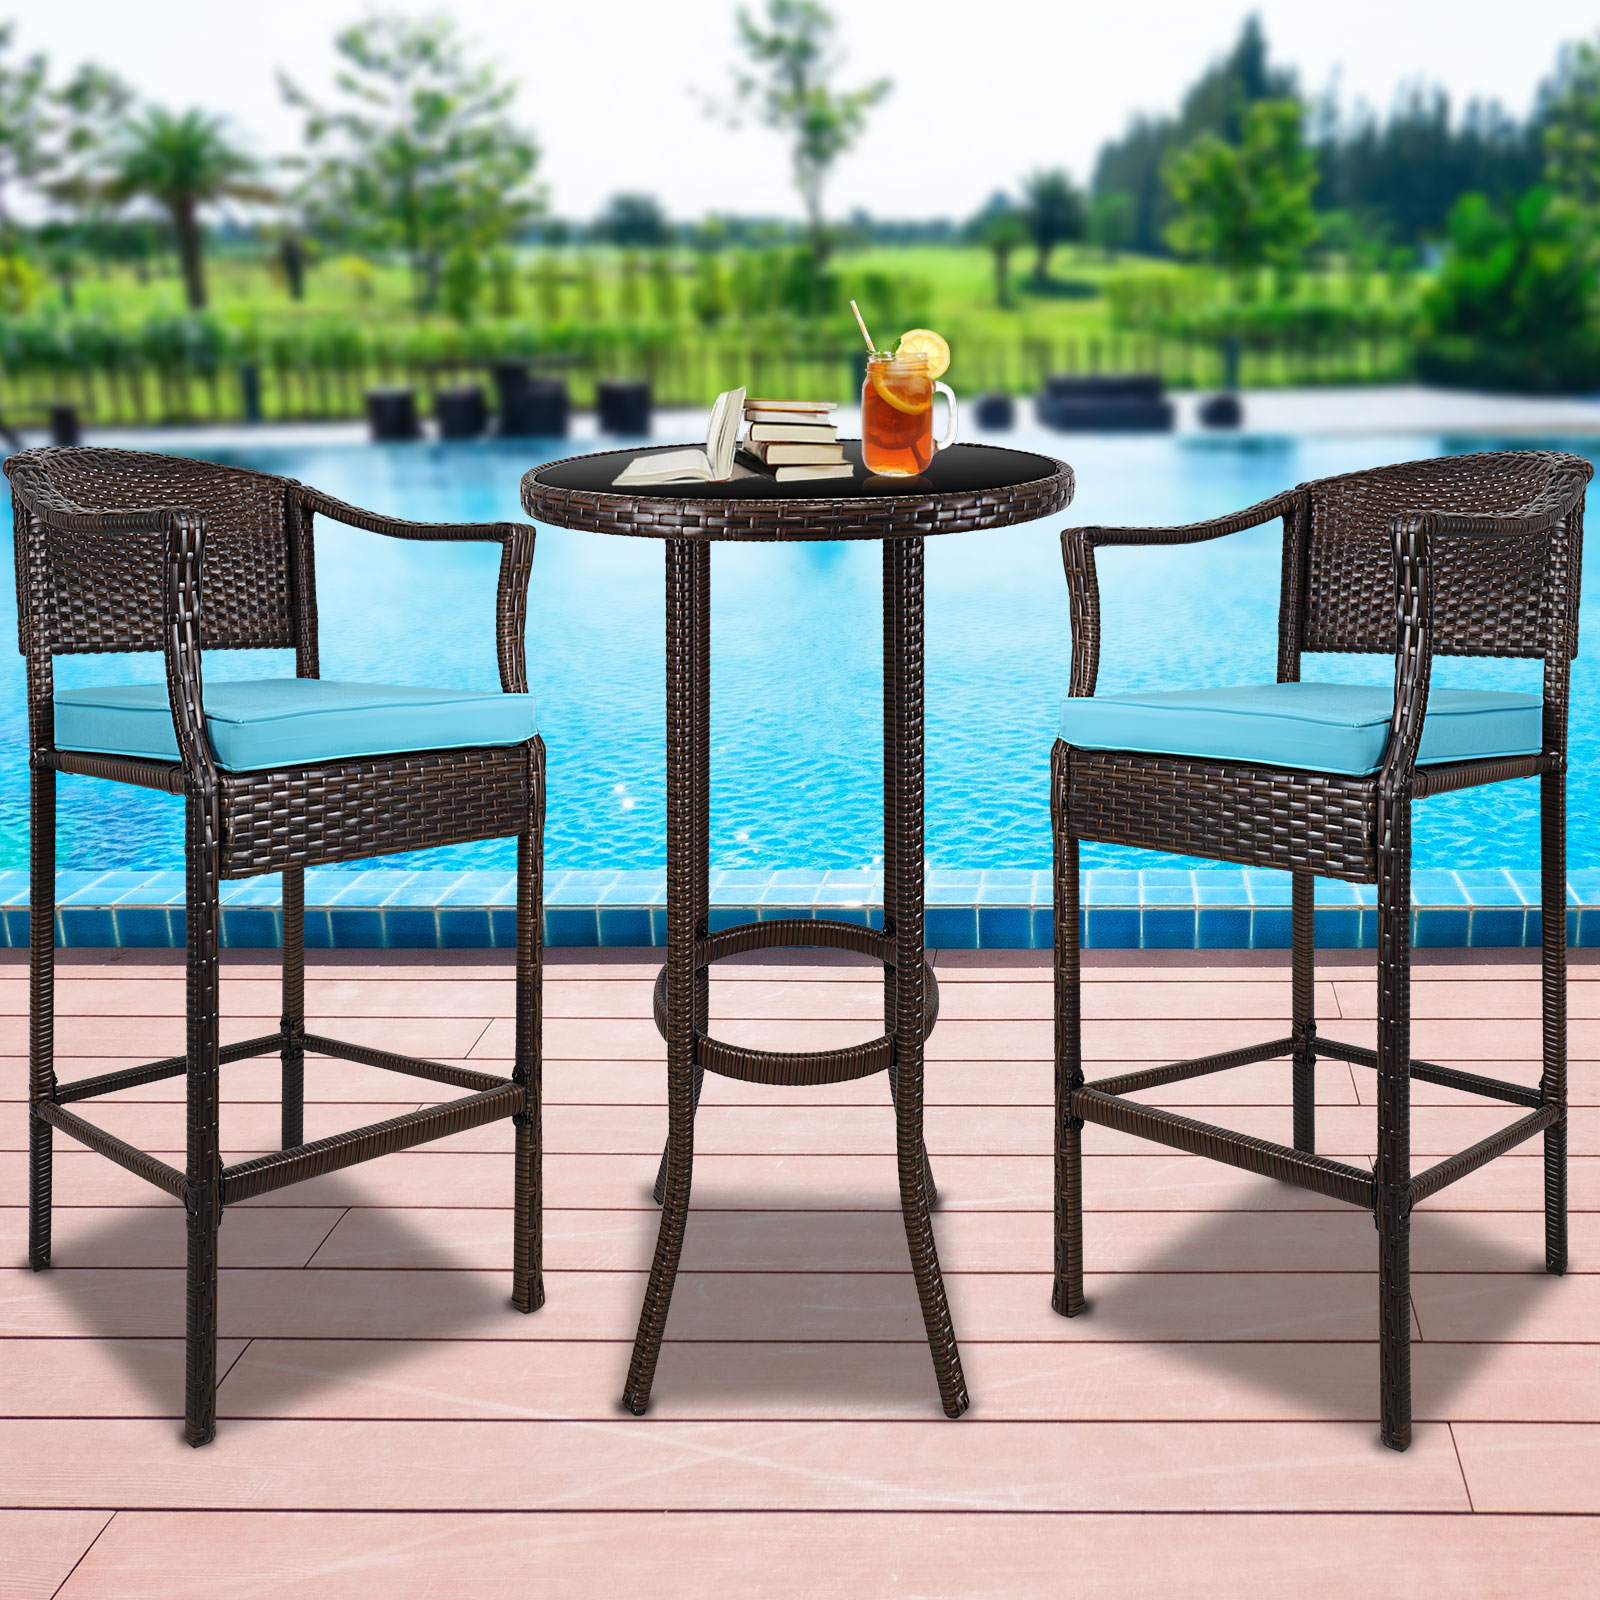 Outdoor High Top Table and Chair, Patio Furniture High Top Table Set with Glass Coffee Table, Removable Cushions, Outdoor Bar Table with Chair, Patio Bistro Set for Backyard Poolside Balcony, Q17058 - image 4 of 13